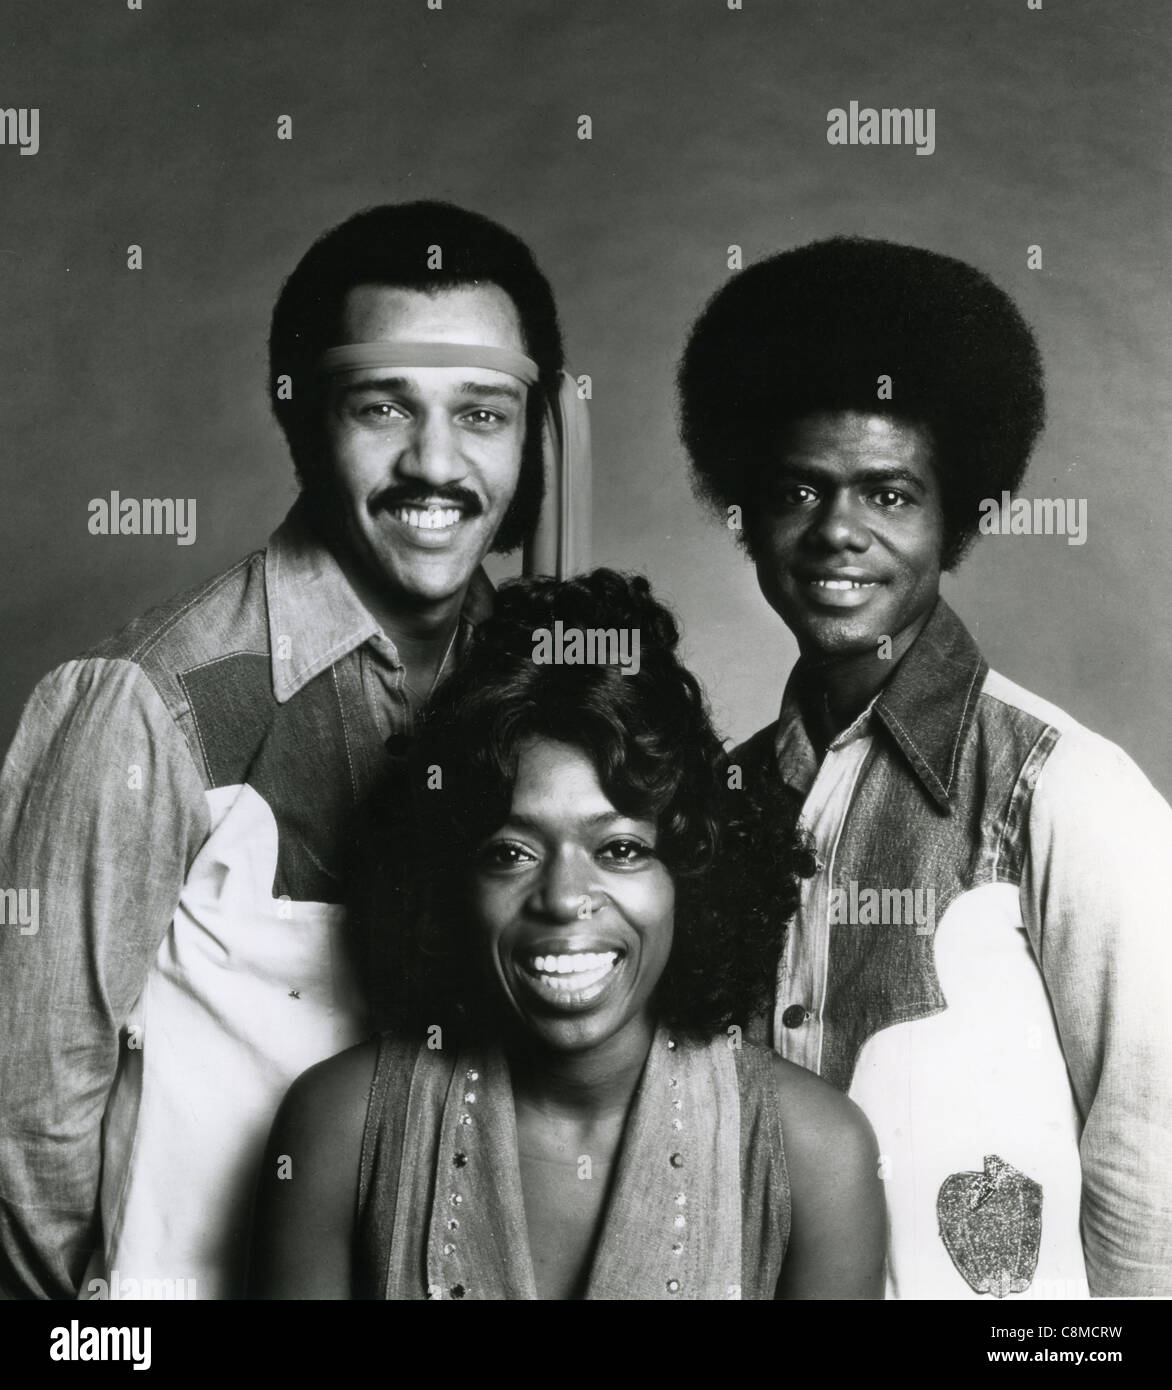 HUES CORPORATION  Promotional photo of US Soul group about 1974 Stock Photo